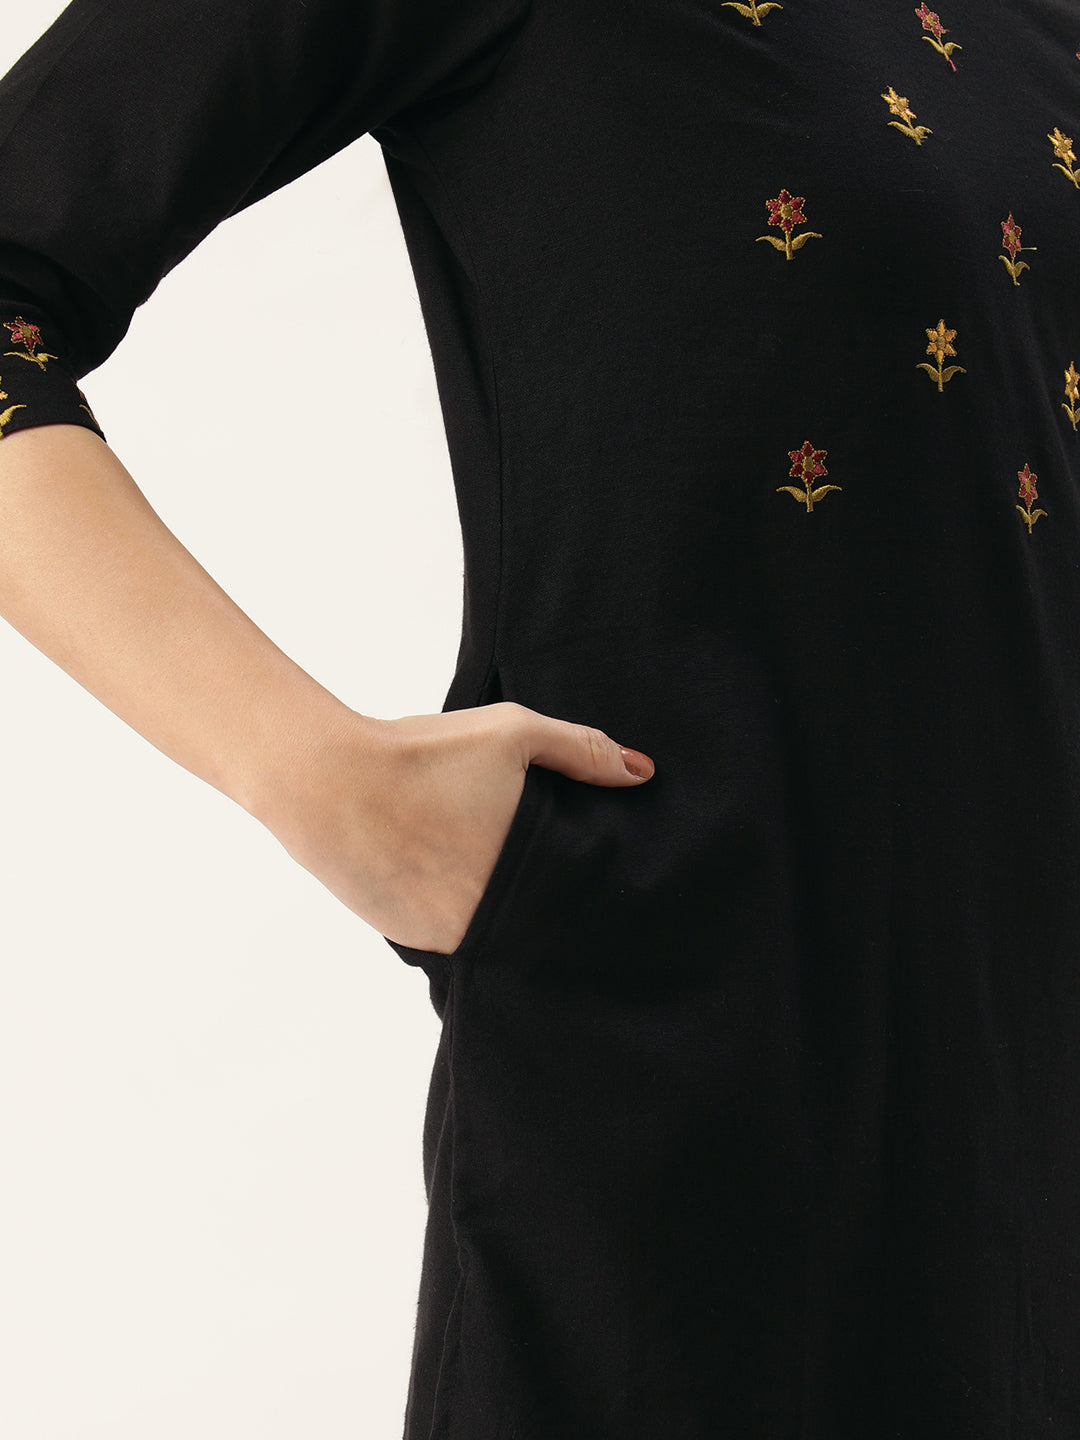 Black Floral Embroidered Tunic